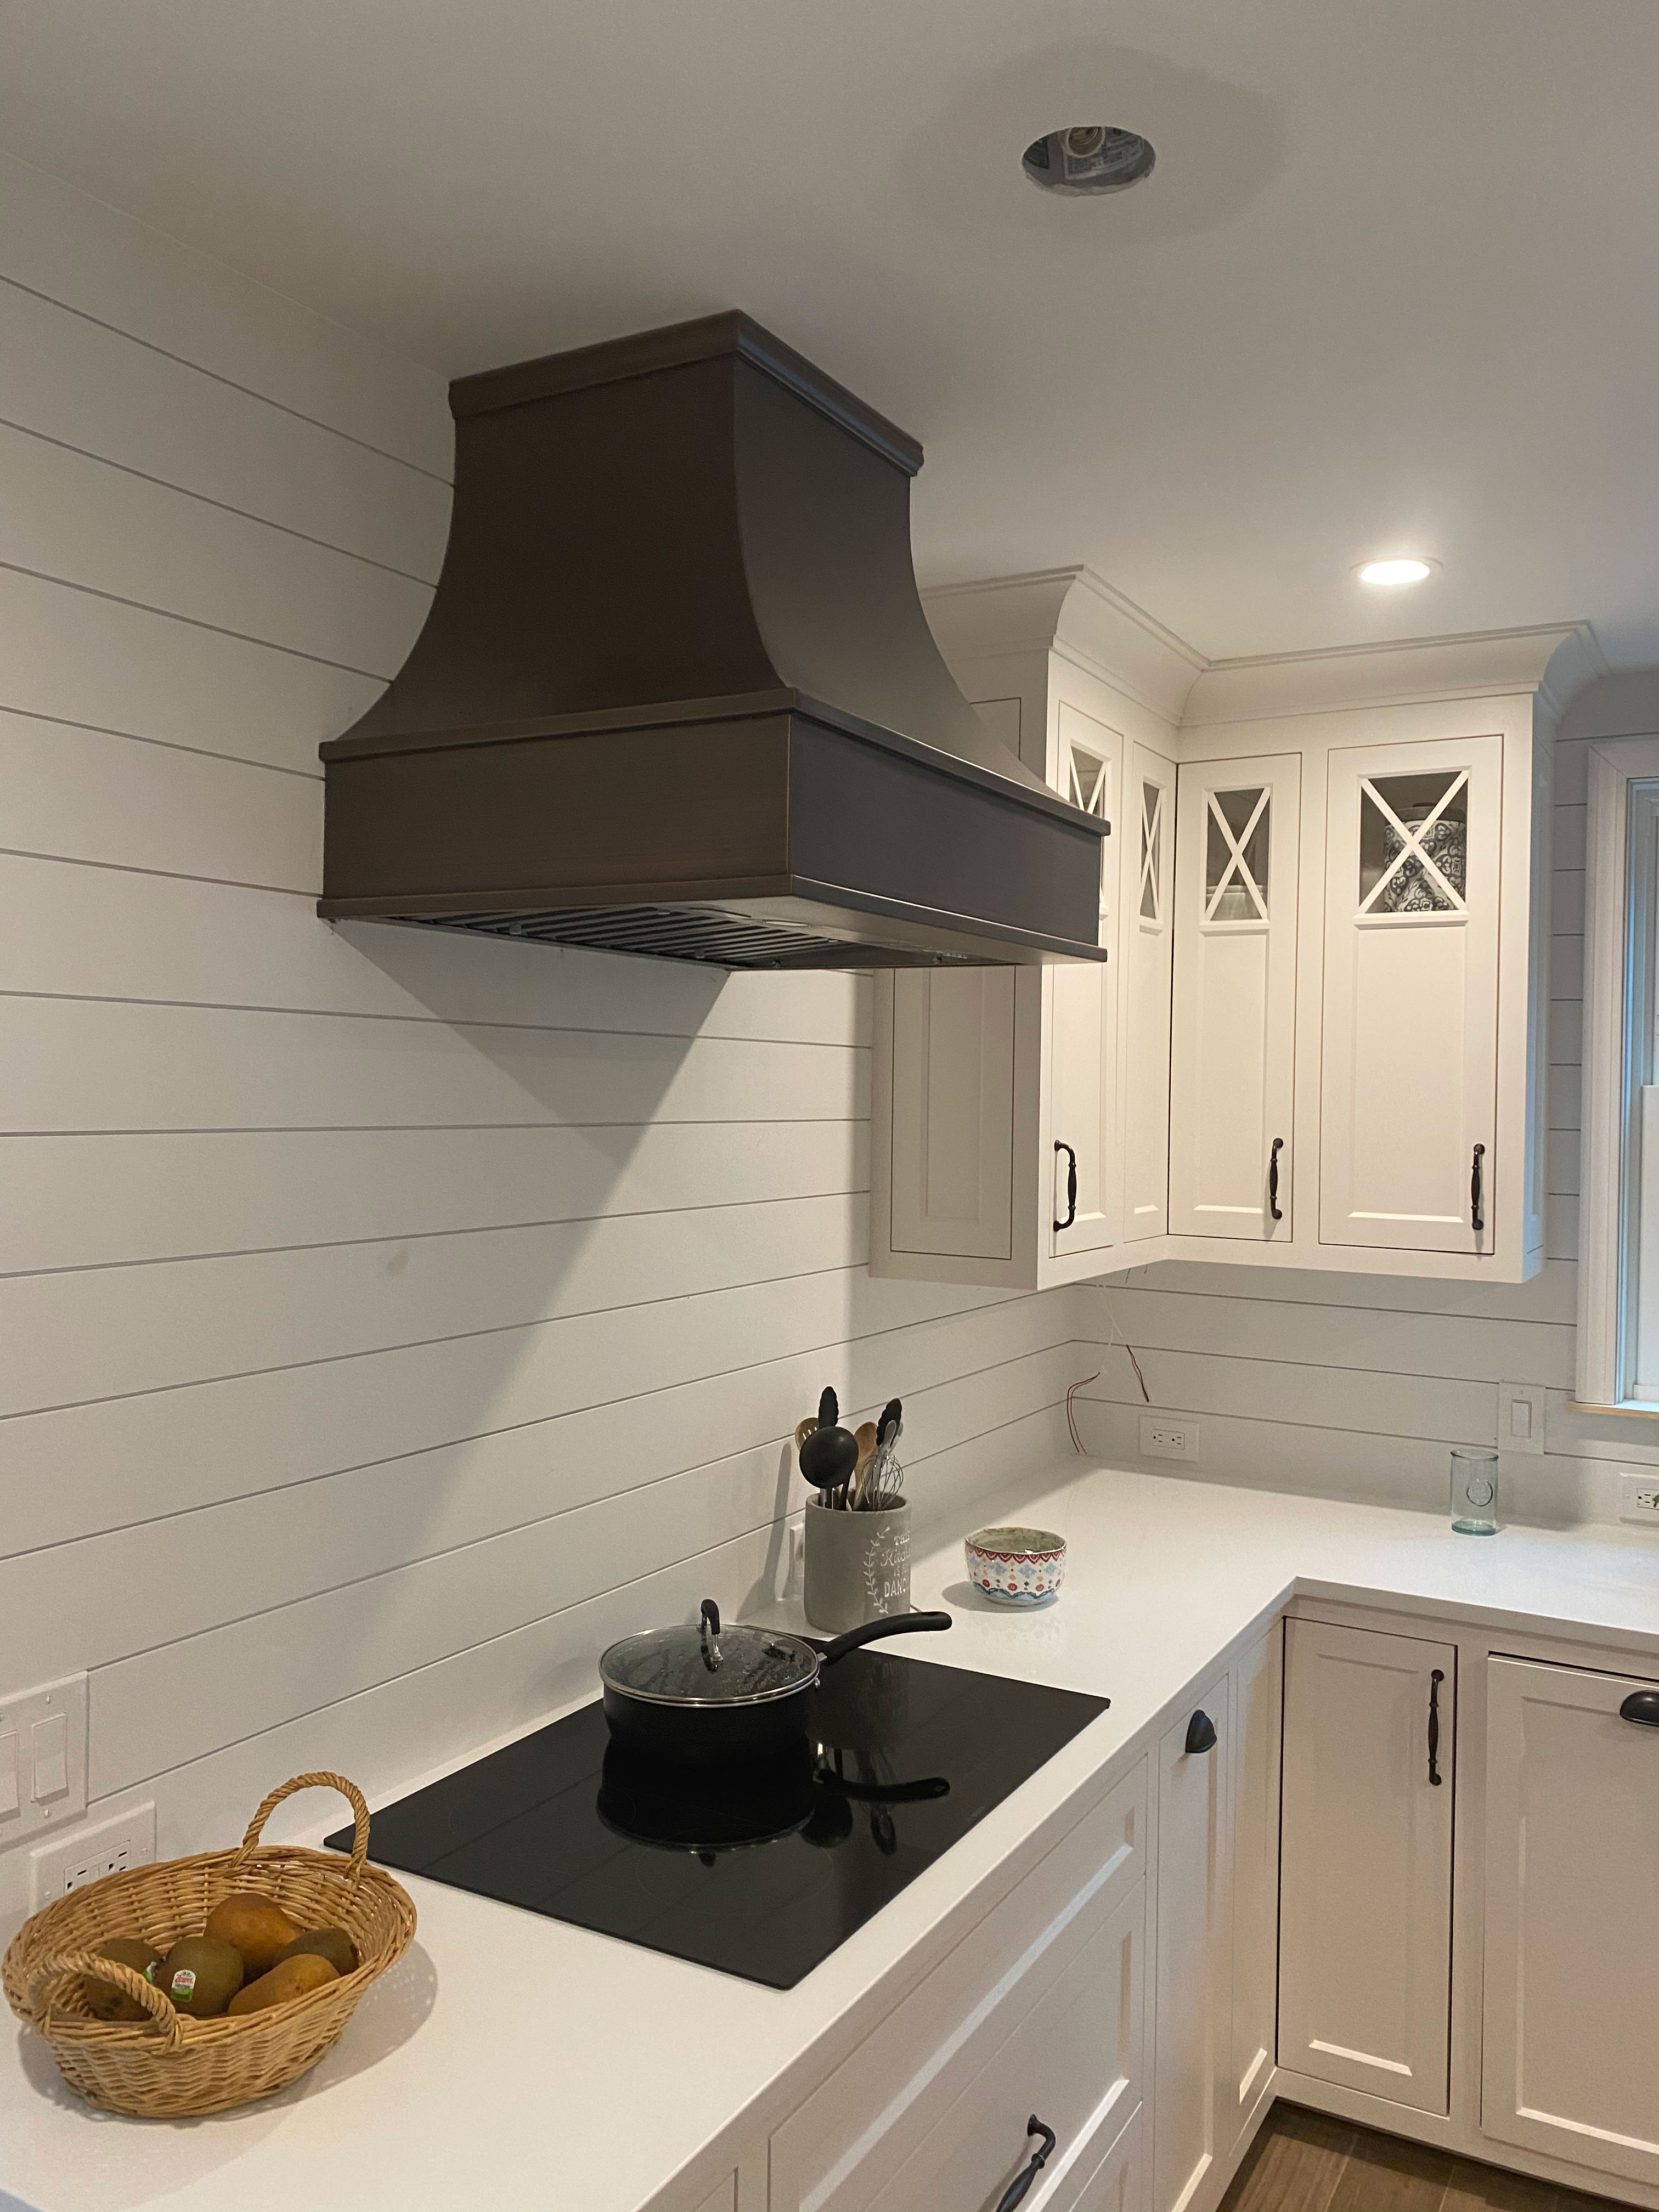 Copper range hood with a vintage finish in white kitchen World CopperSmith